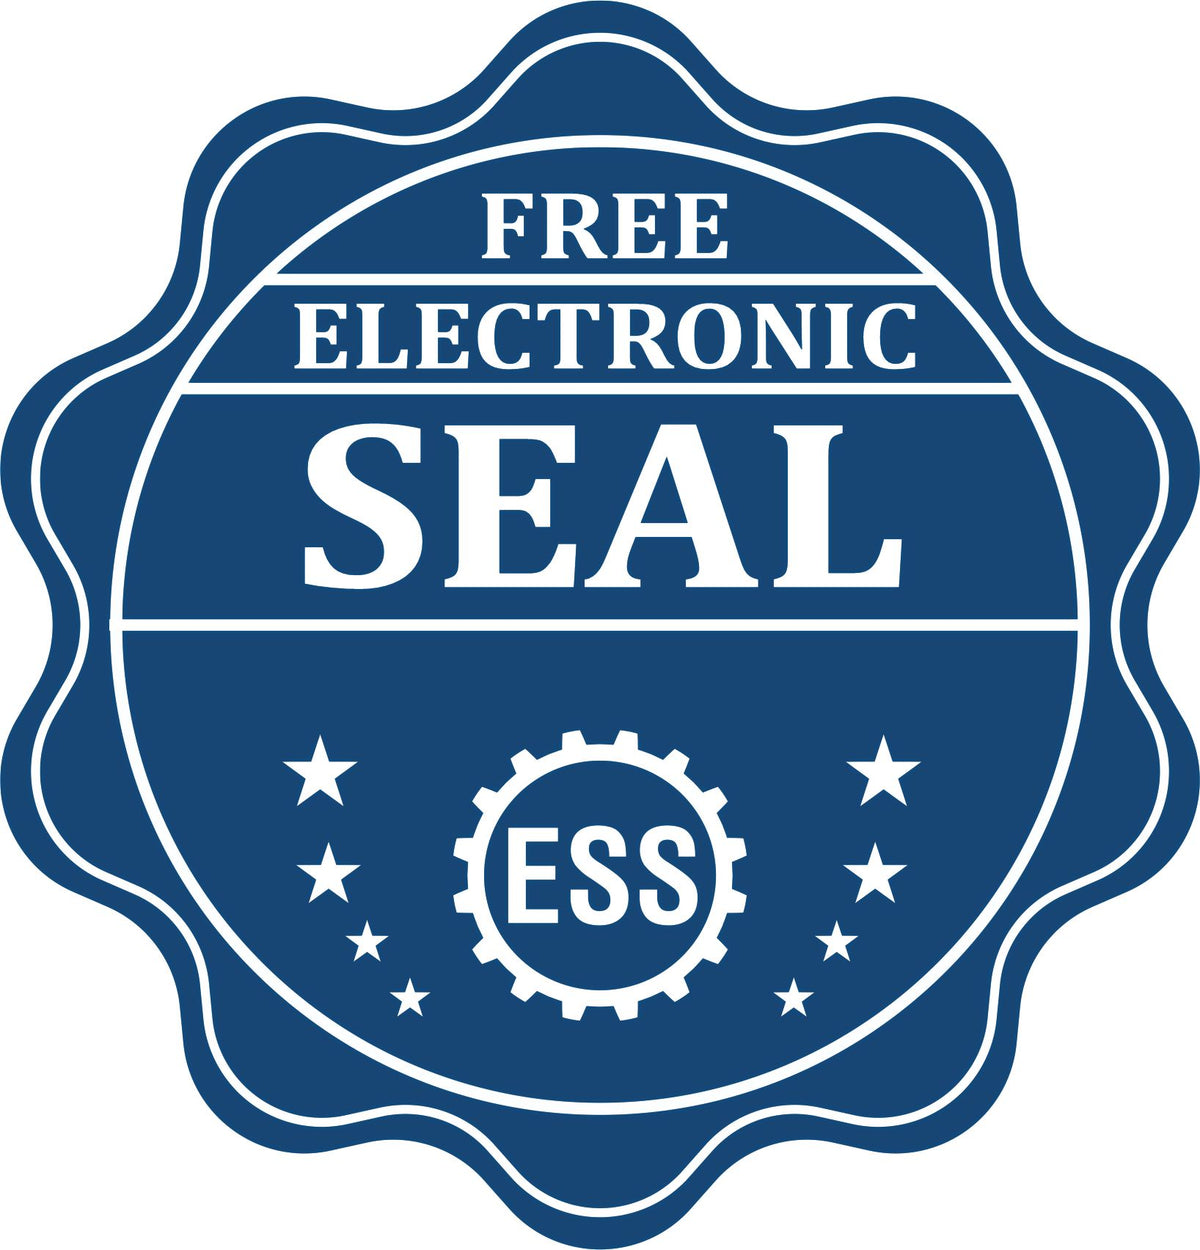 A badge showing a free electronic seal for the Heavy Duty Cast Iron Kentucky Engineer Seal Embosser with stars and the ESS gear on the emblem.